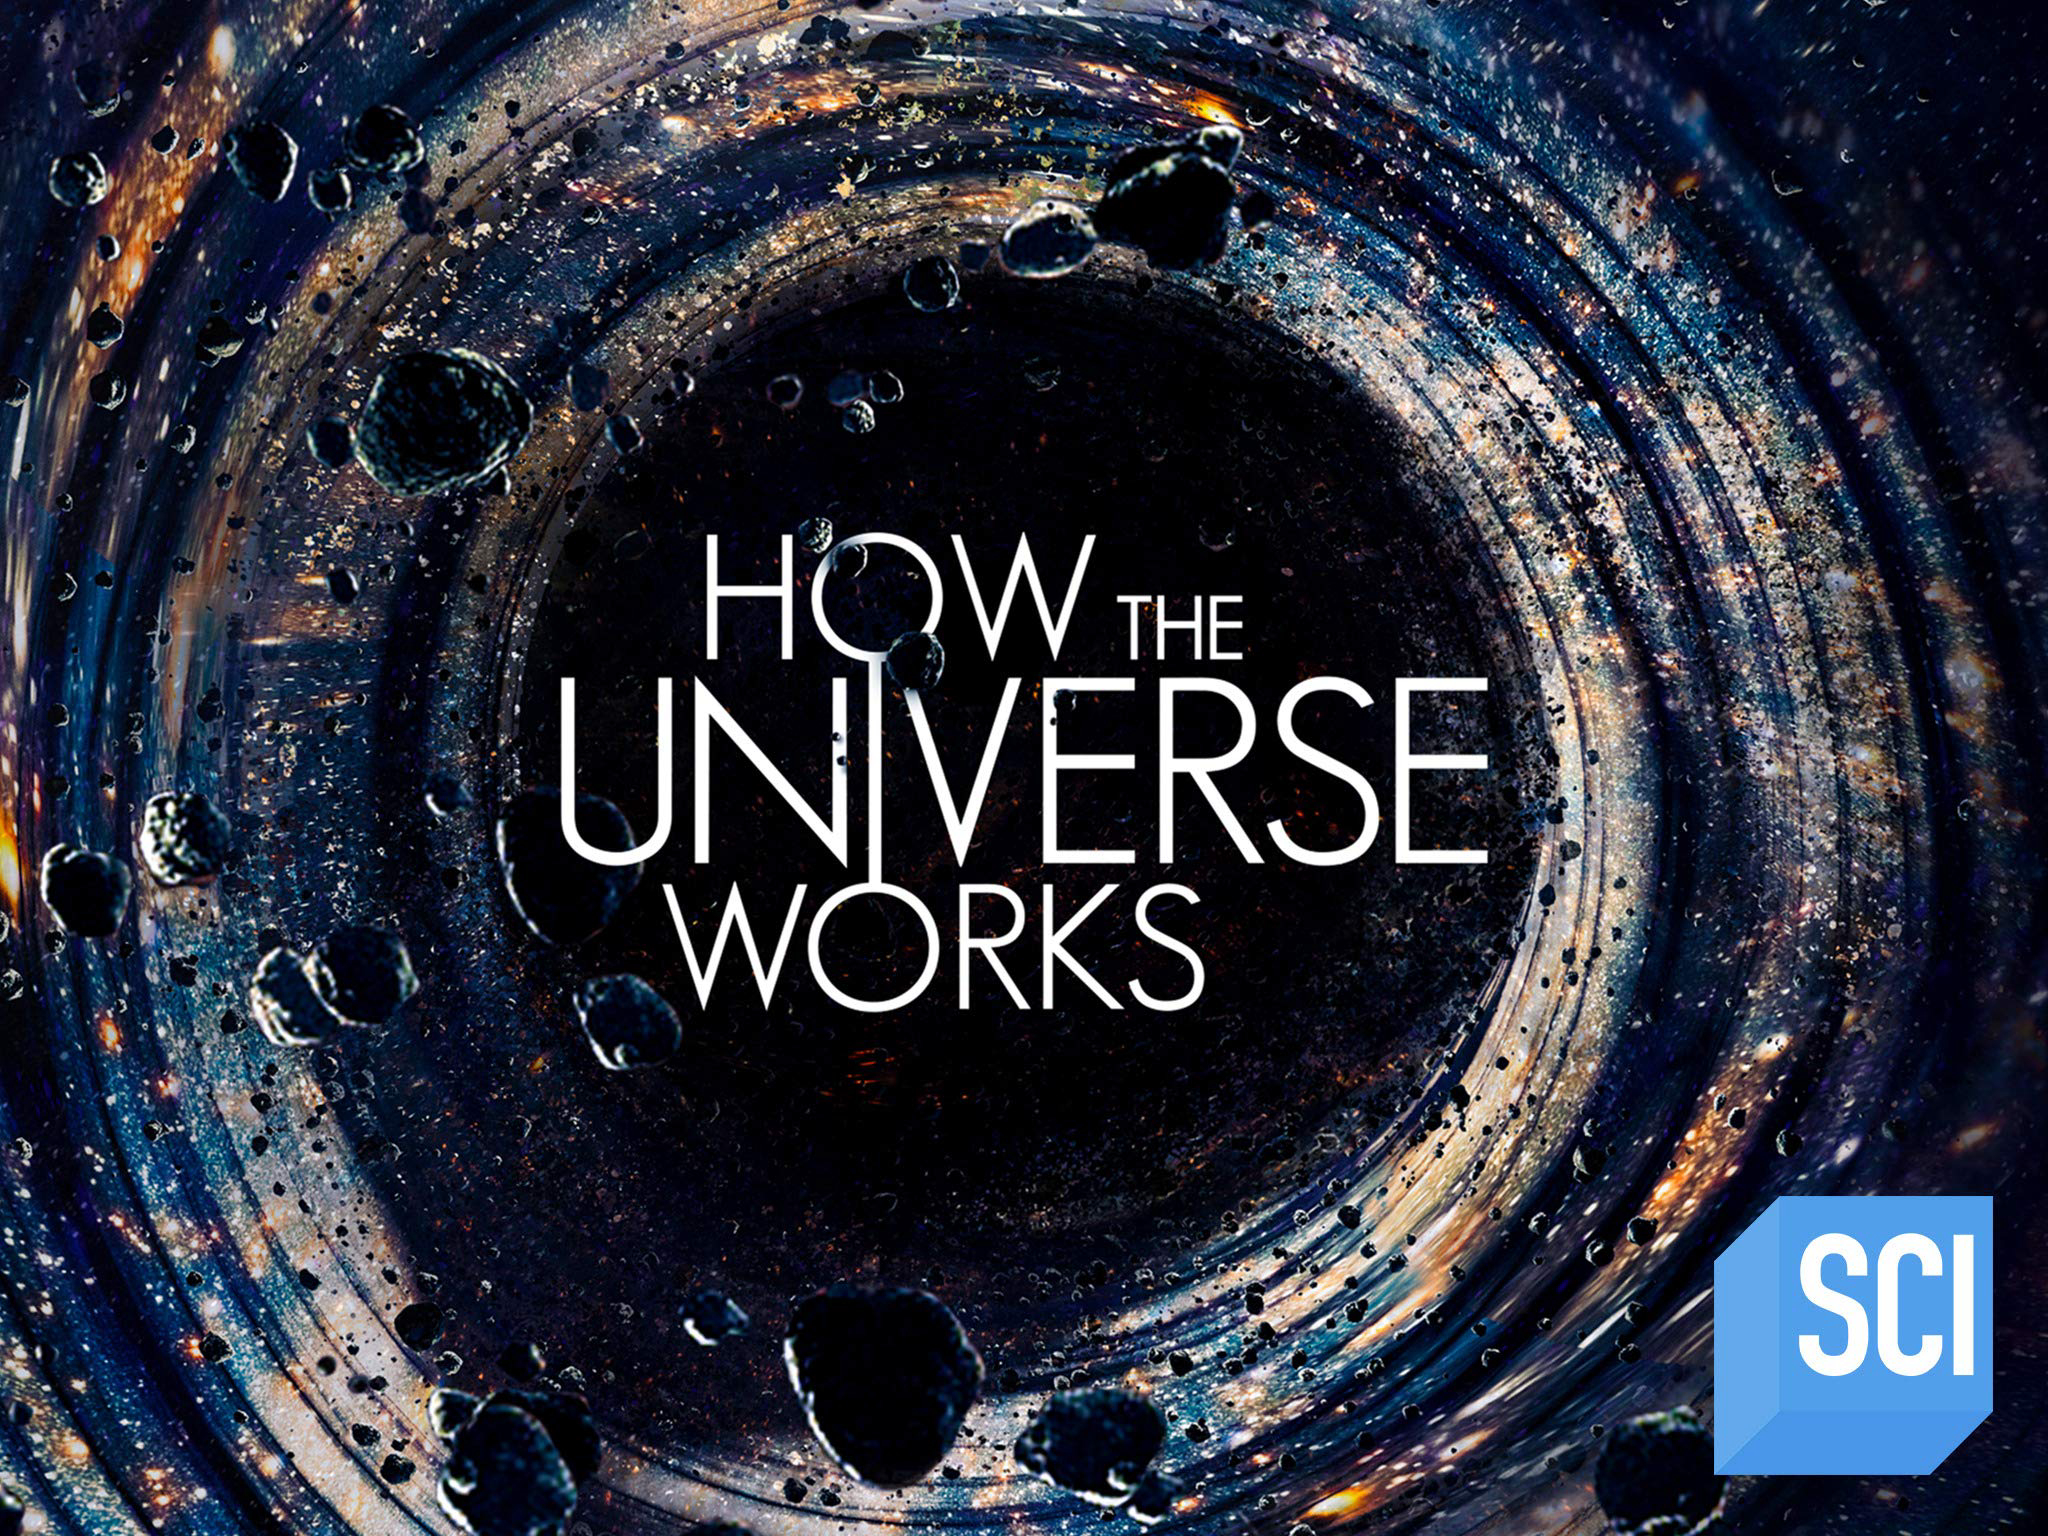 How the Universe Works (Season 9) / How the Universe Works (Season 9) (2021)